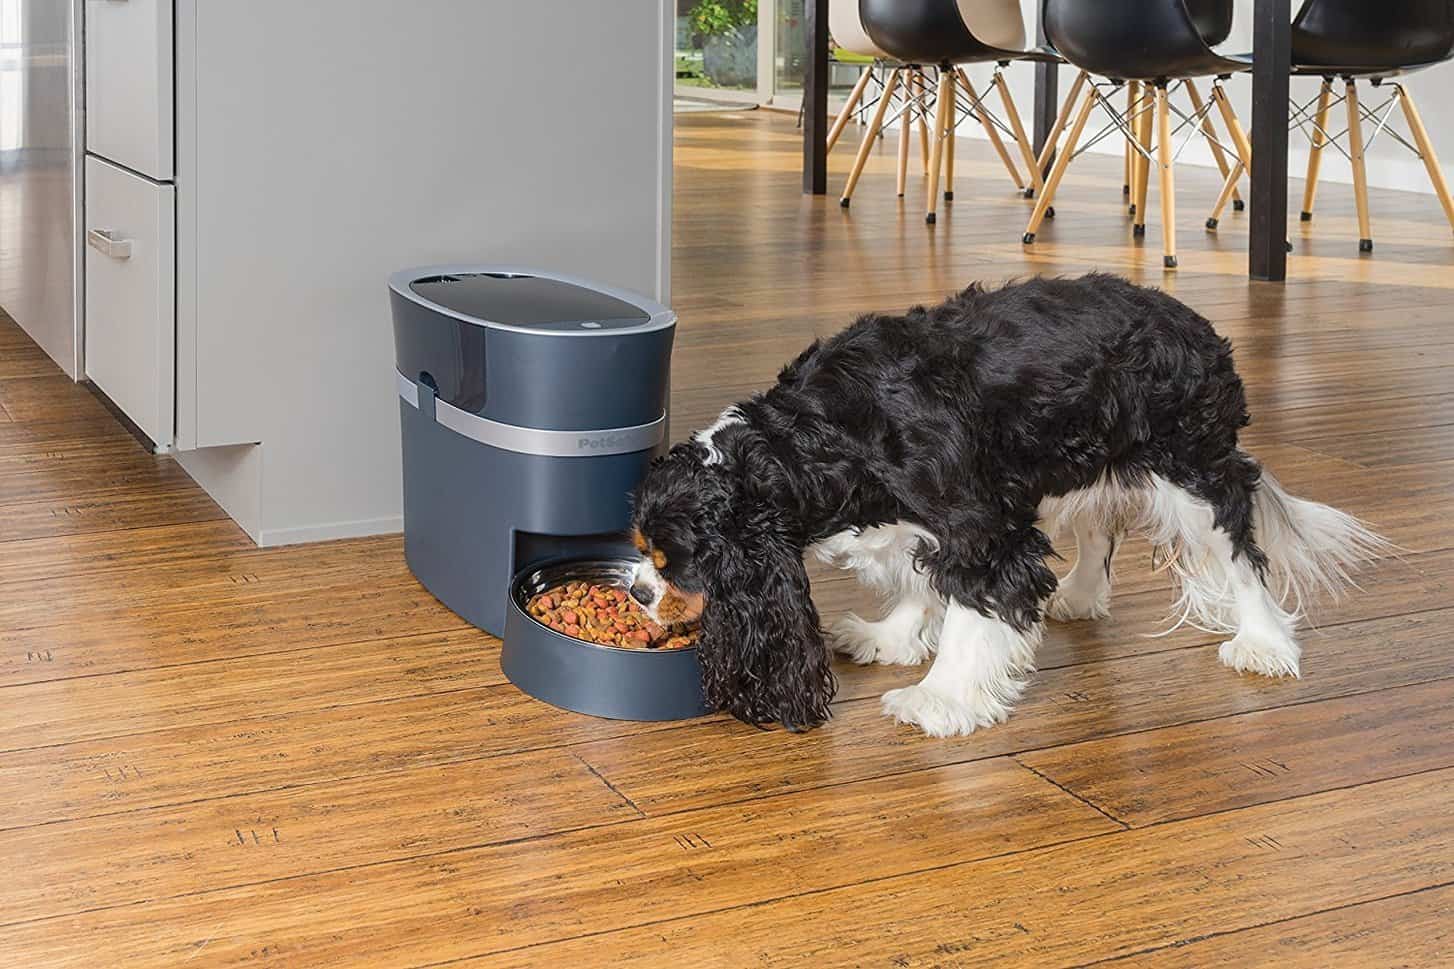 PETSAFE SMART FEED AUTOMATIC PET FEEDER FOR IPHONE & ANDROID